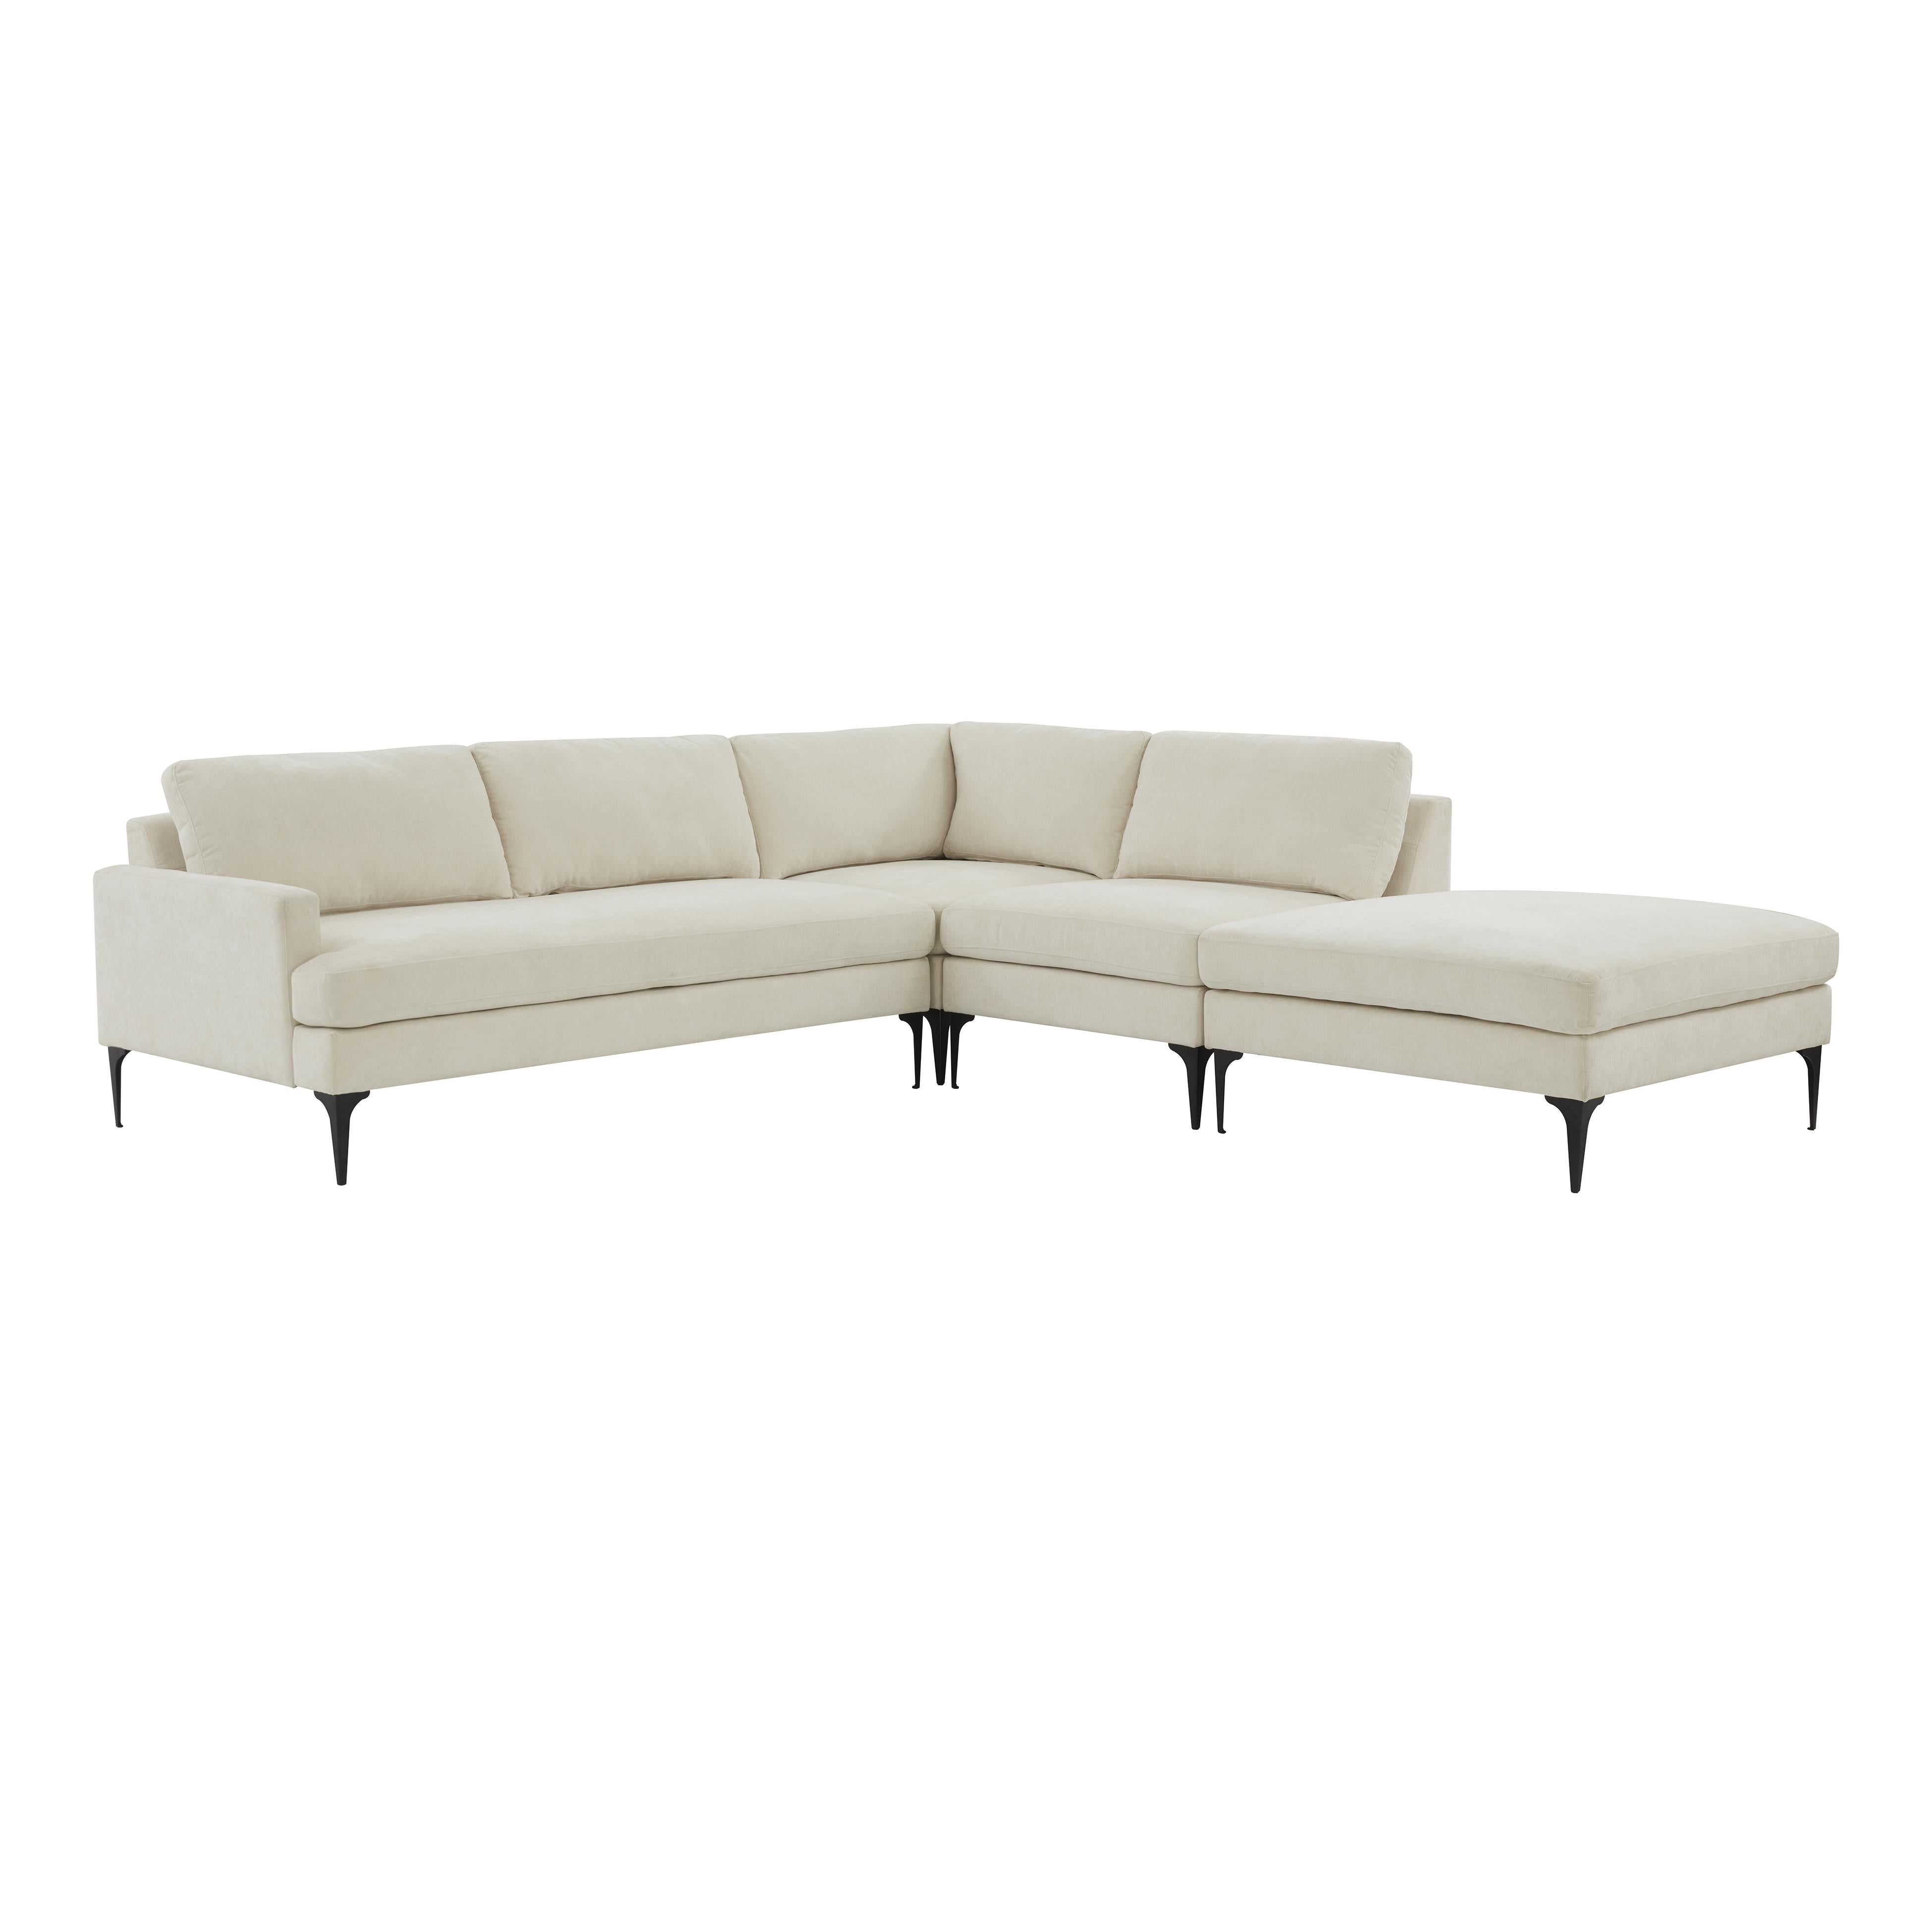 Tov Furniture Sectionals - Serena Cream Velvet Large RAF Chaise Sectional with Black Legs